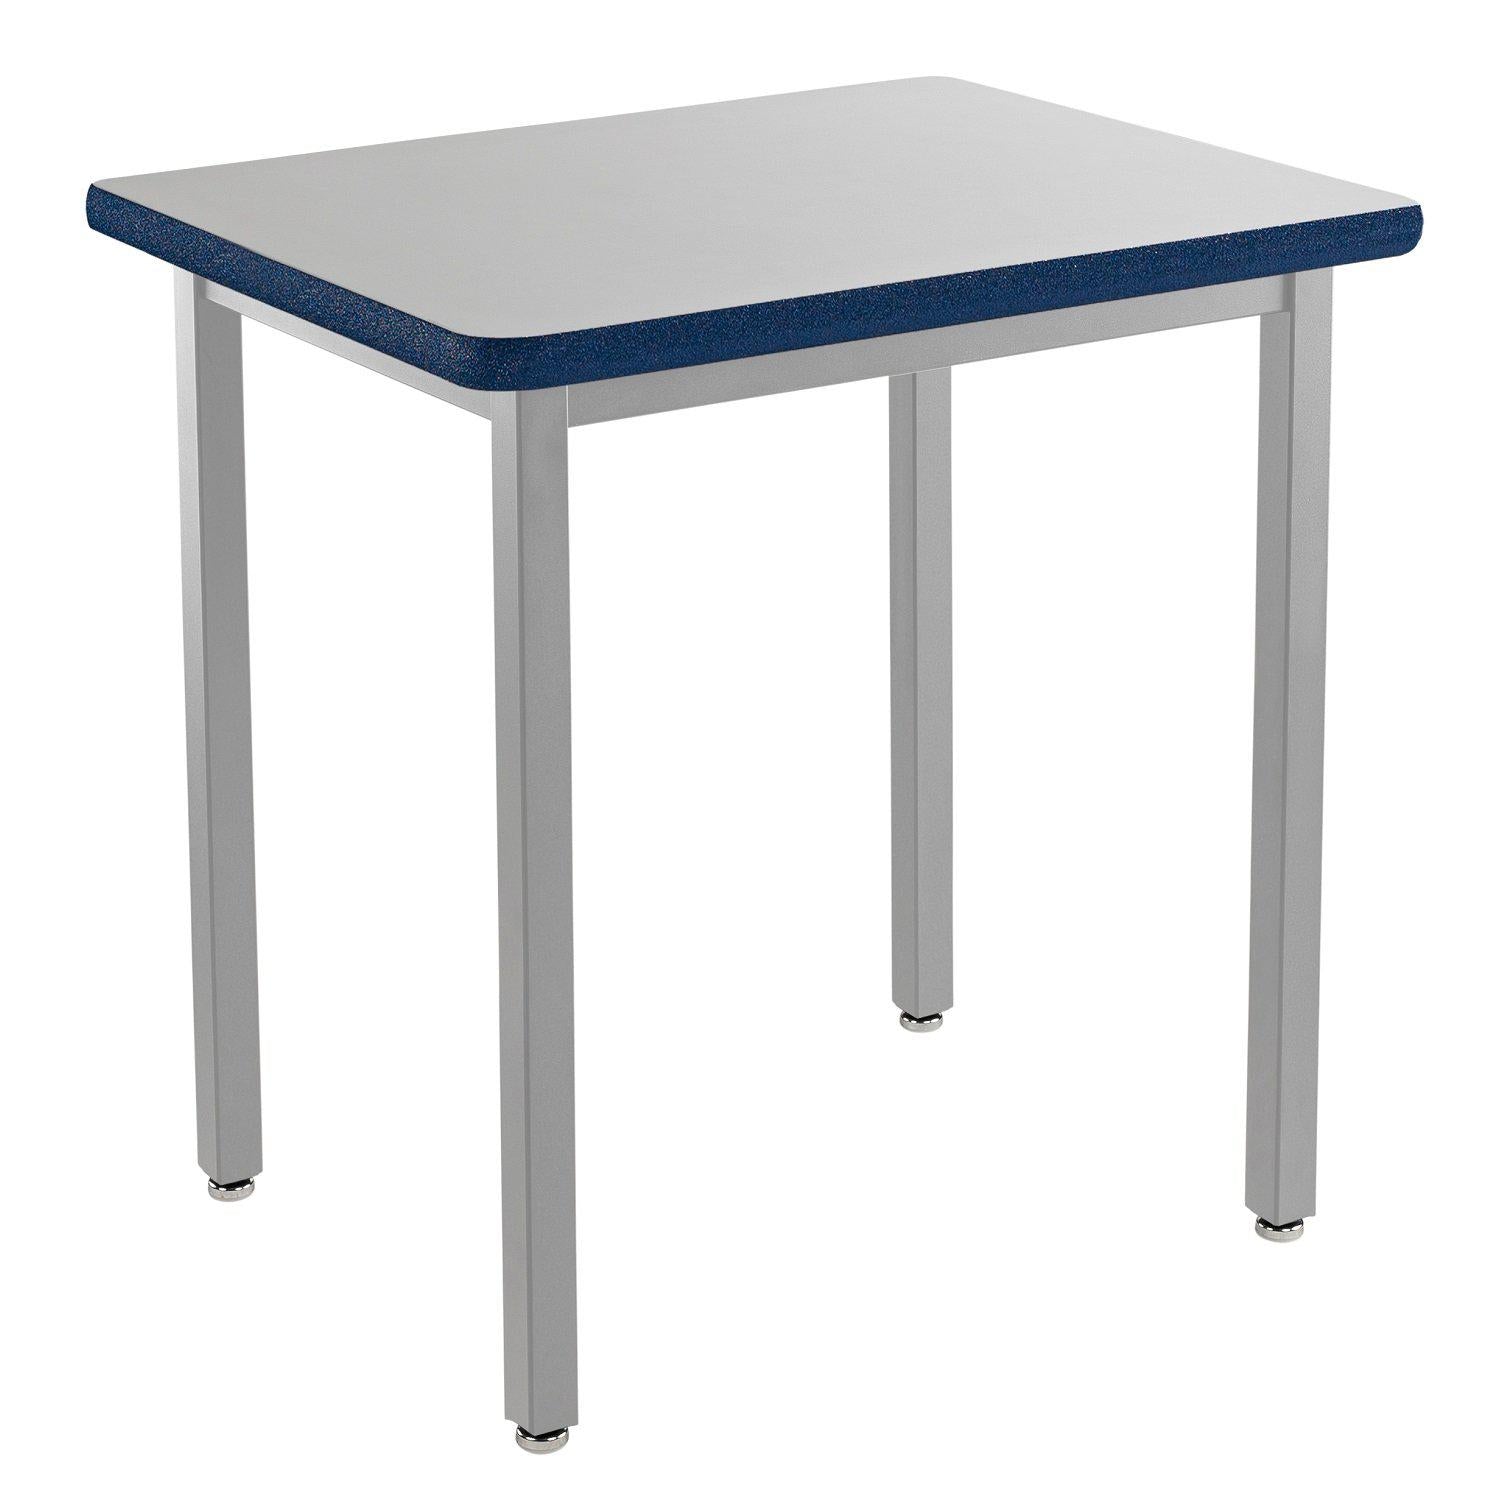 Heavy-Duty Fixed Height Utility Table, Soft Grey Frame, 30" x 30", Supreme High-Pressure Laminate Top with Black ProtectEdge